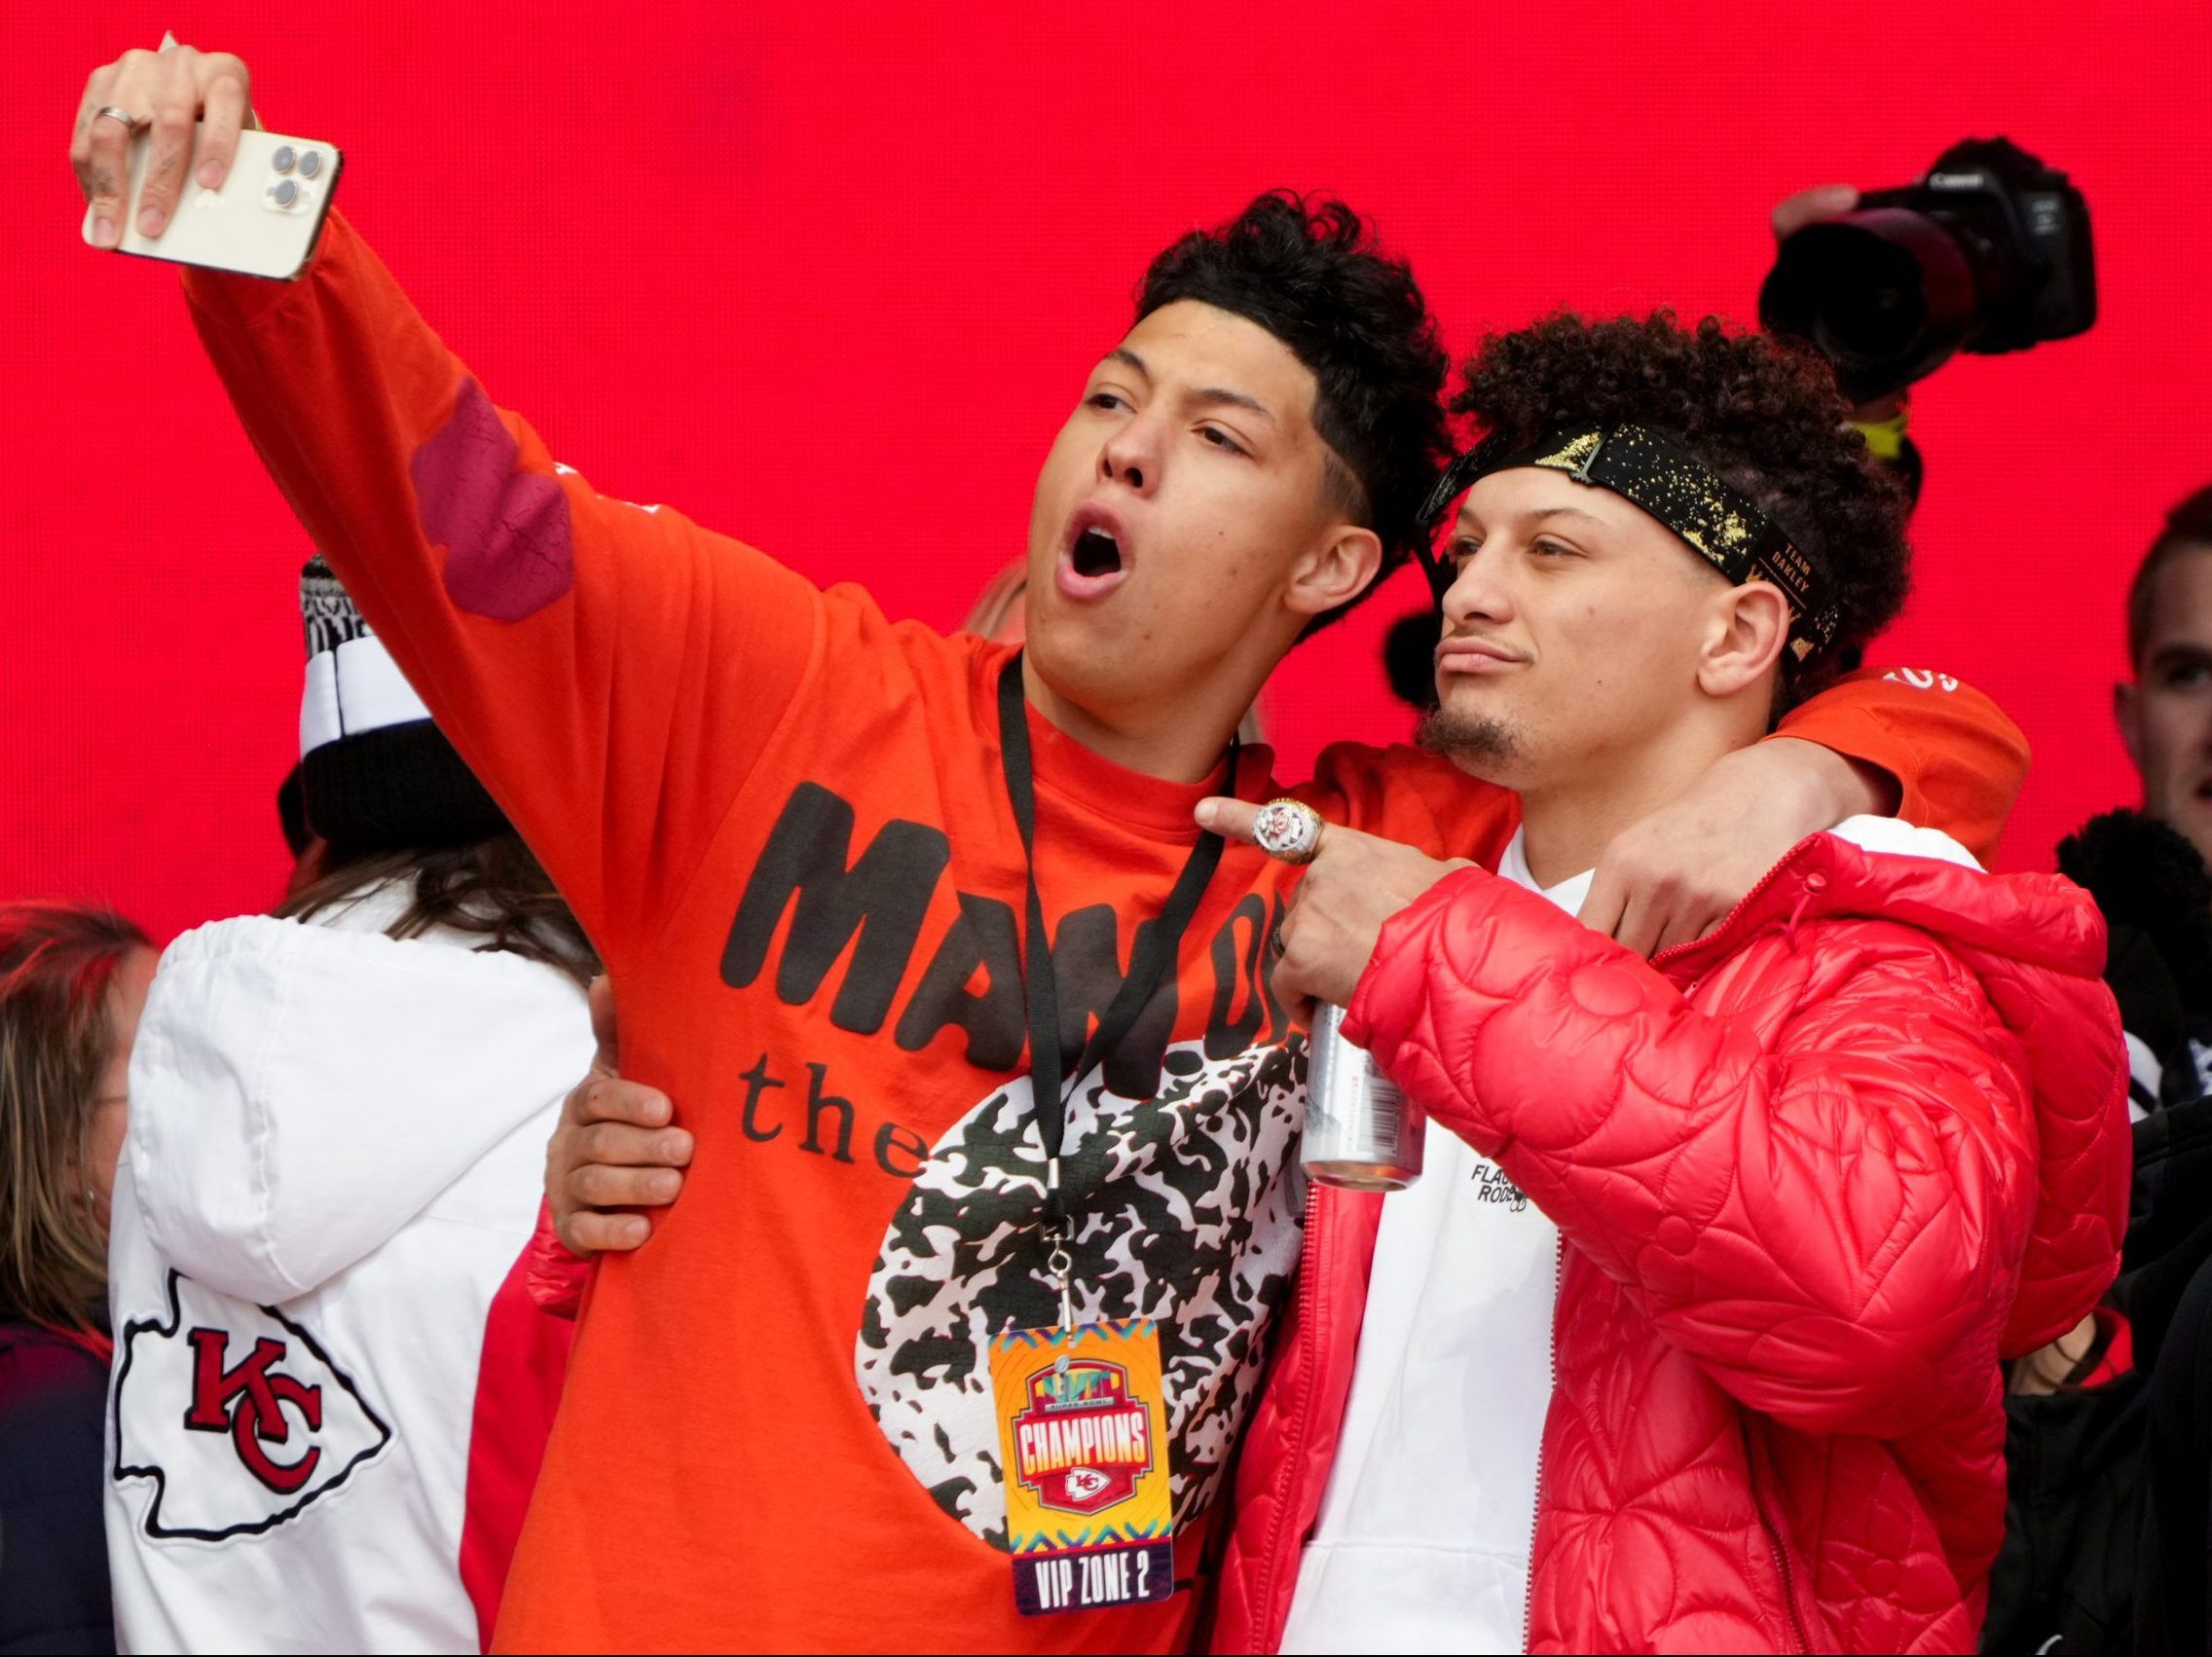 Patrick Mahomes' Brother Dances Behind Him During Post-Game Interview